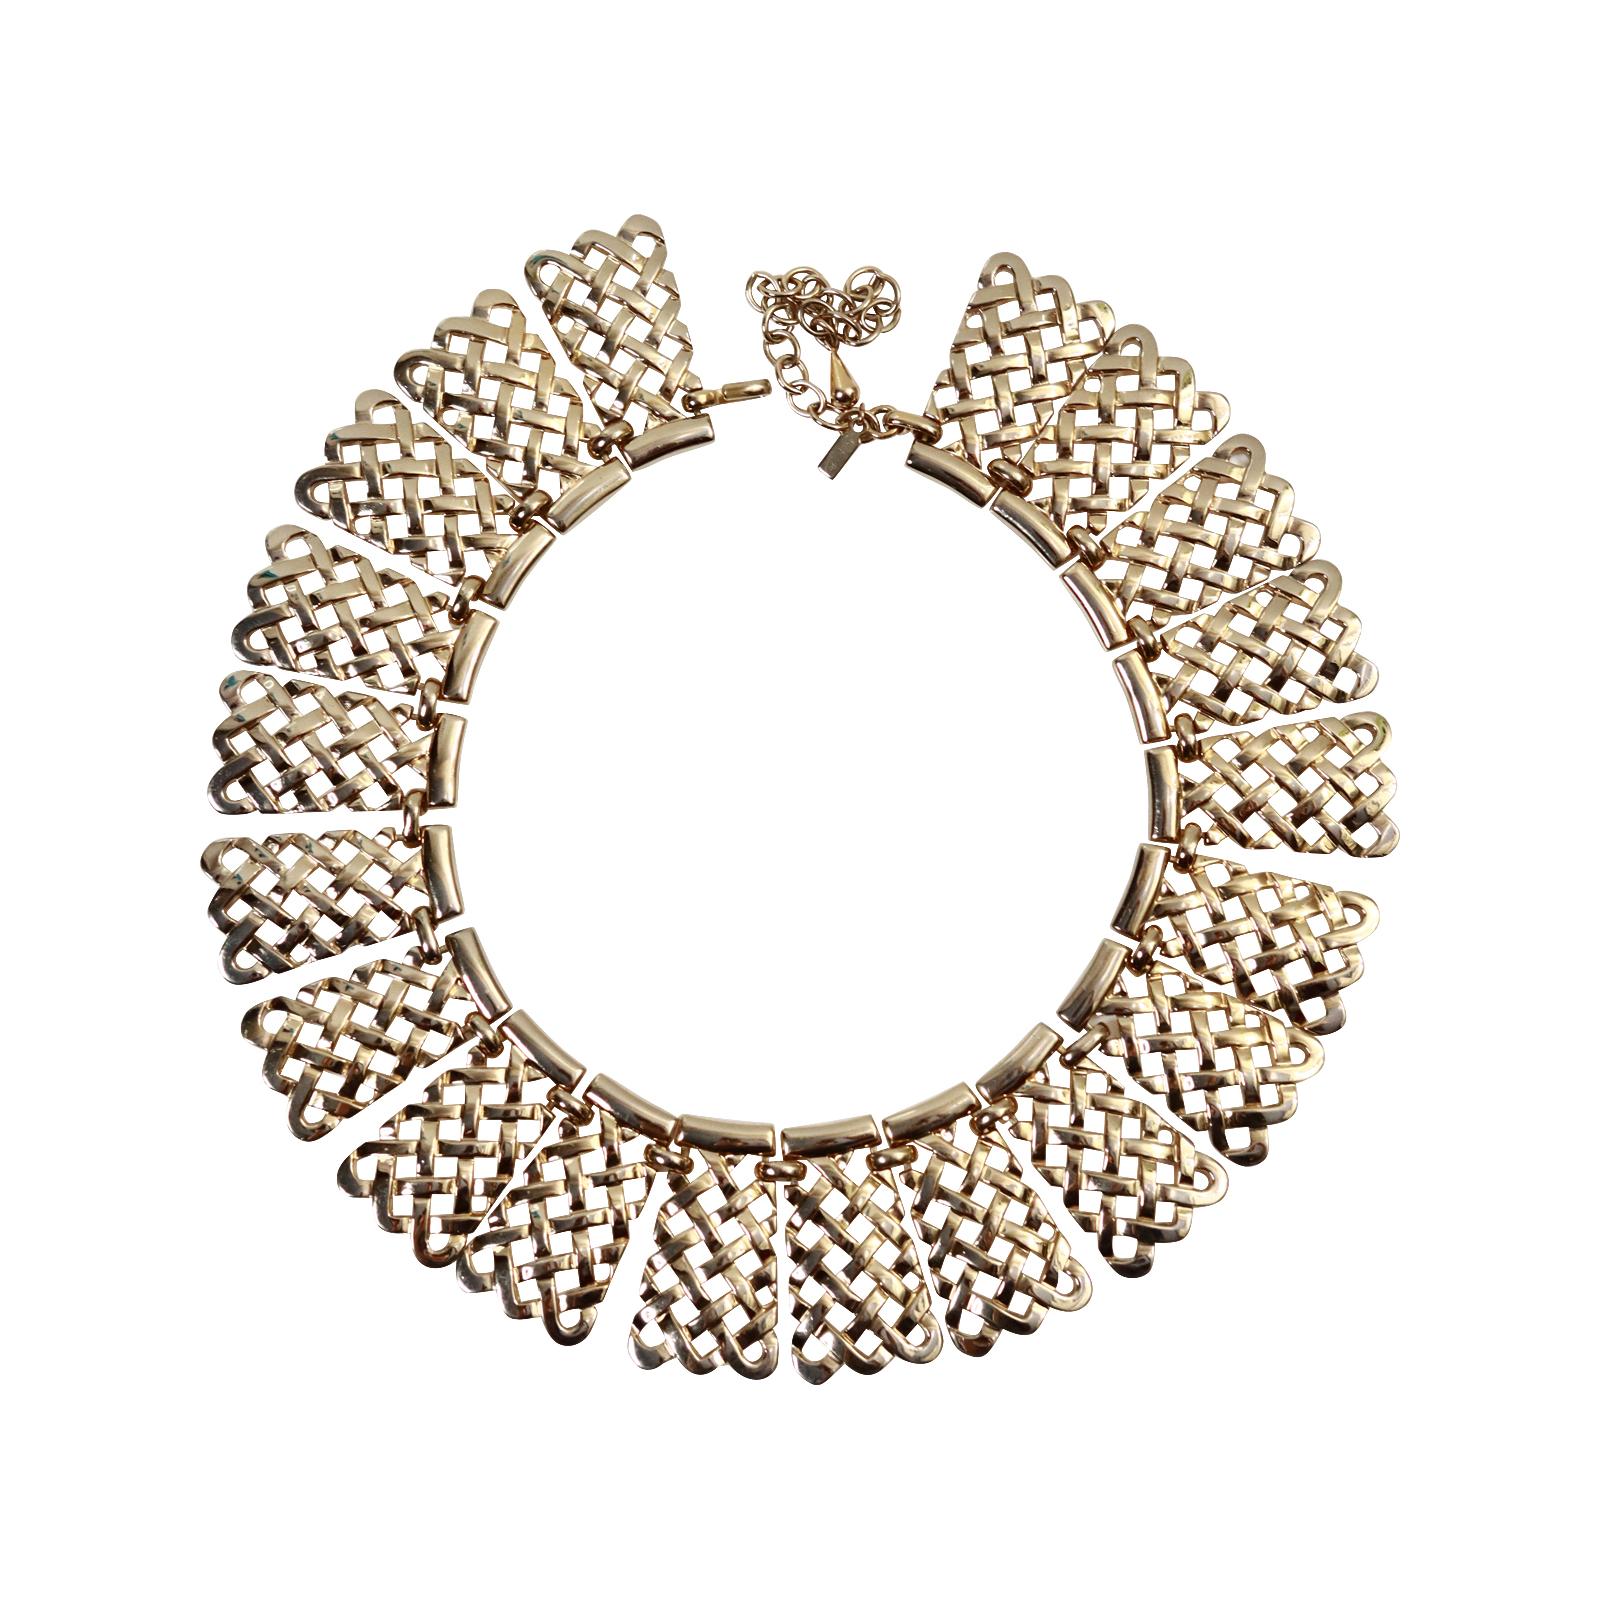 Vintage Monet Lattice Collar Necklace Circa 1980s In Excellent Condition For Sale In New York, NY